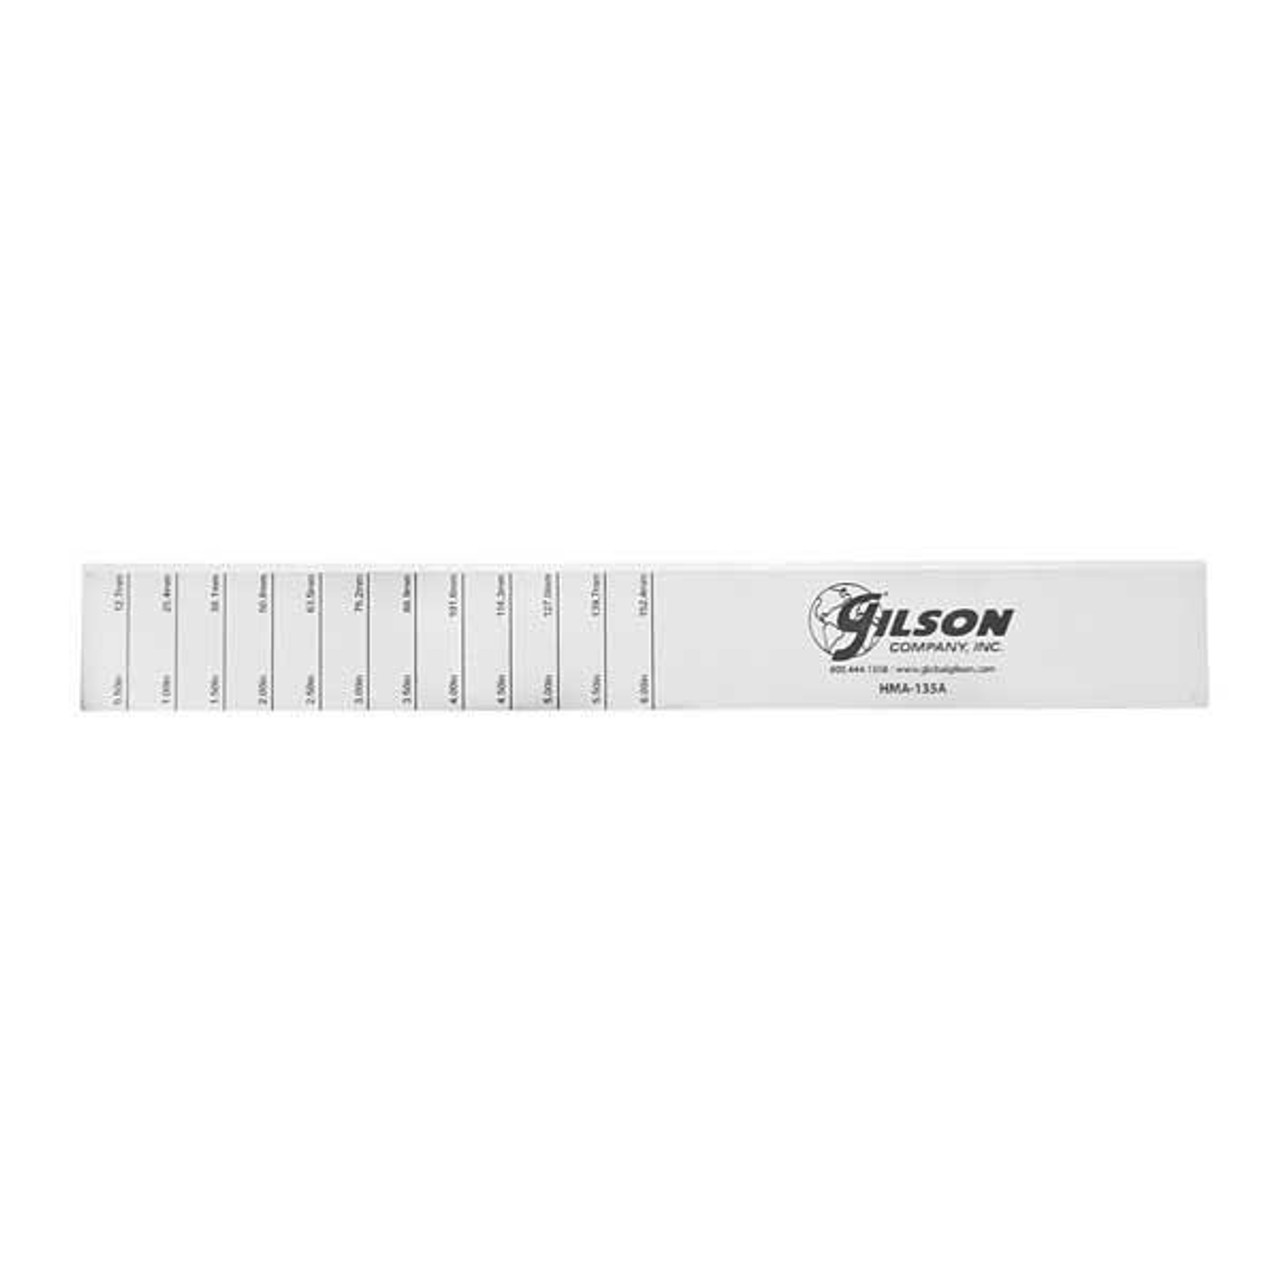 Stainless Steel Straightedges - Gilson Co.